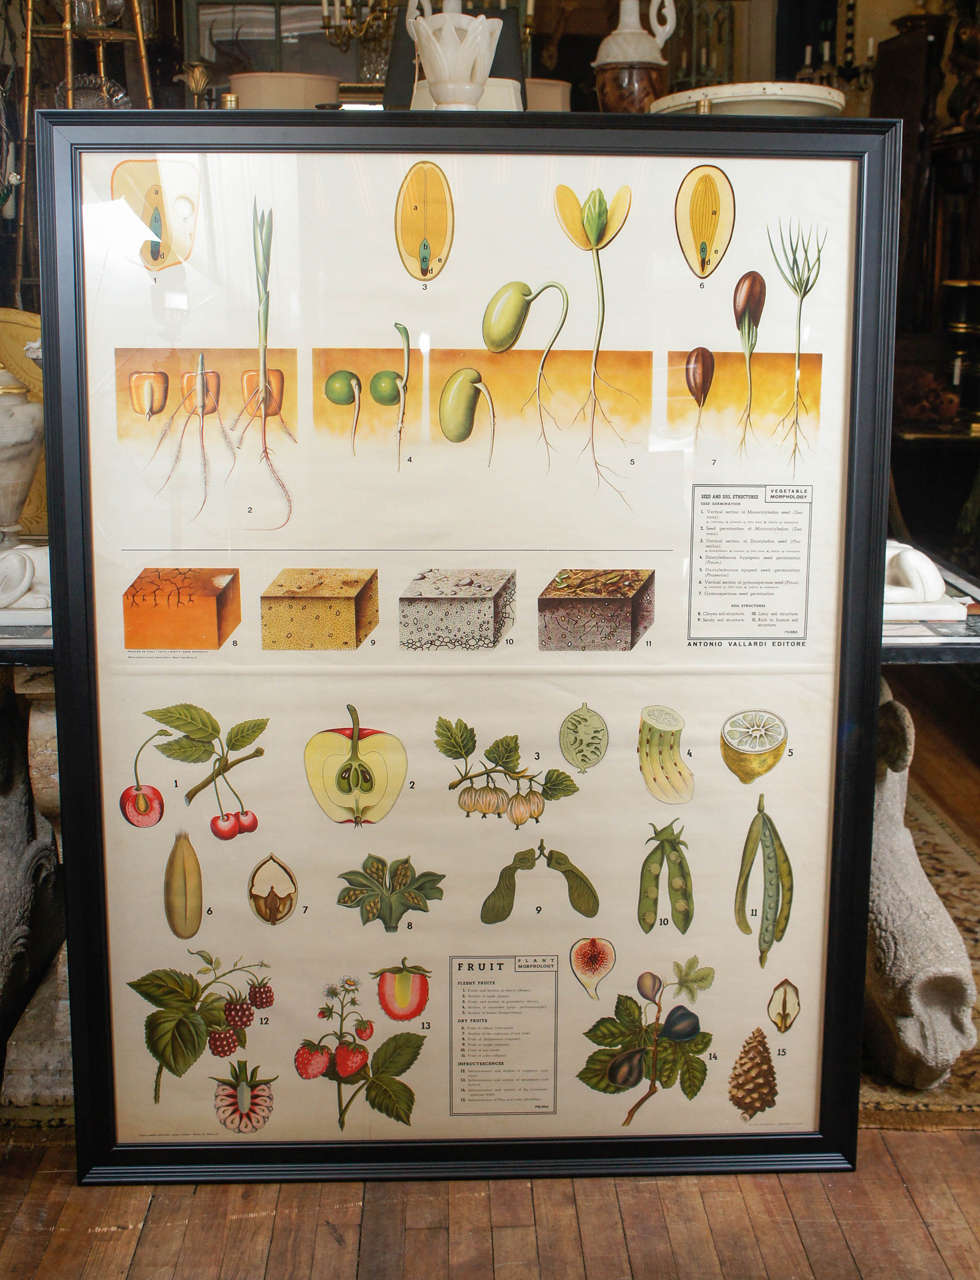 This very large chromolithographic print on architects paper was printed in Italy and is dated 1948. Designed as a teaching tool for science classes the piece shows cell structure and leaf formation, as well as plant reproduction. Newly framed the